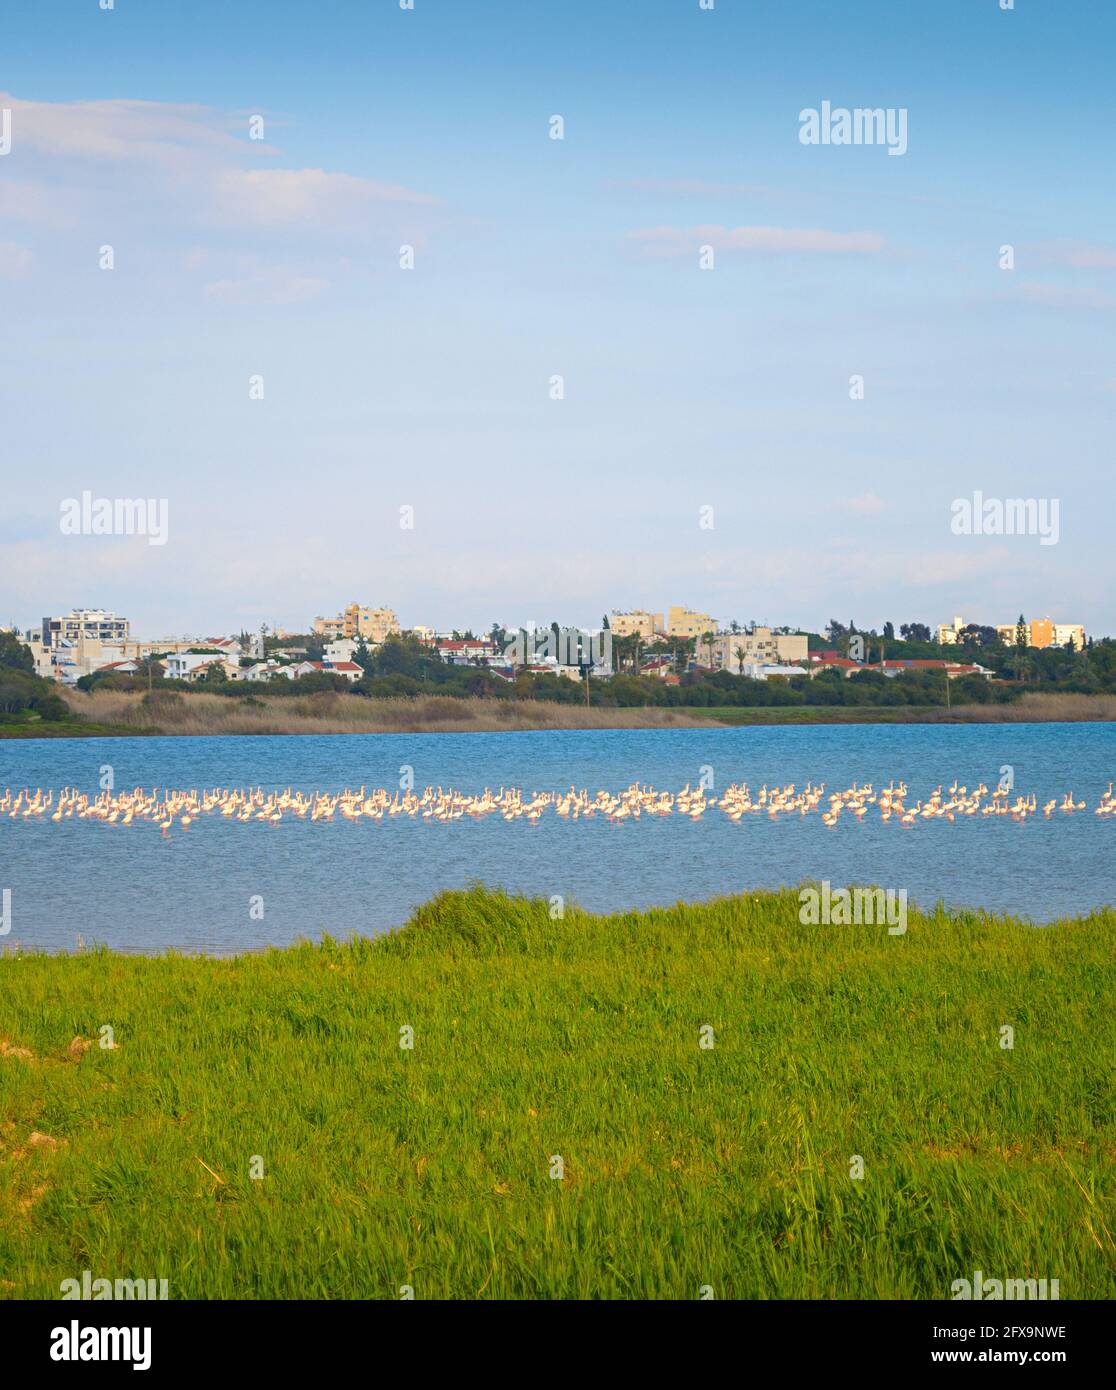 Flamingos on a lake. Larnaca city in the background. Cyprus Stock Photo